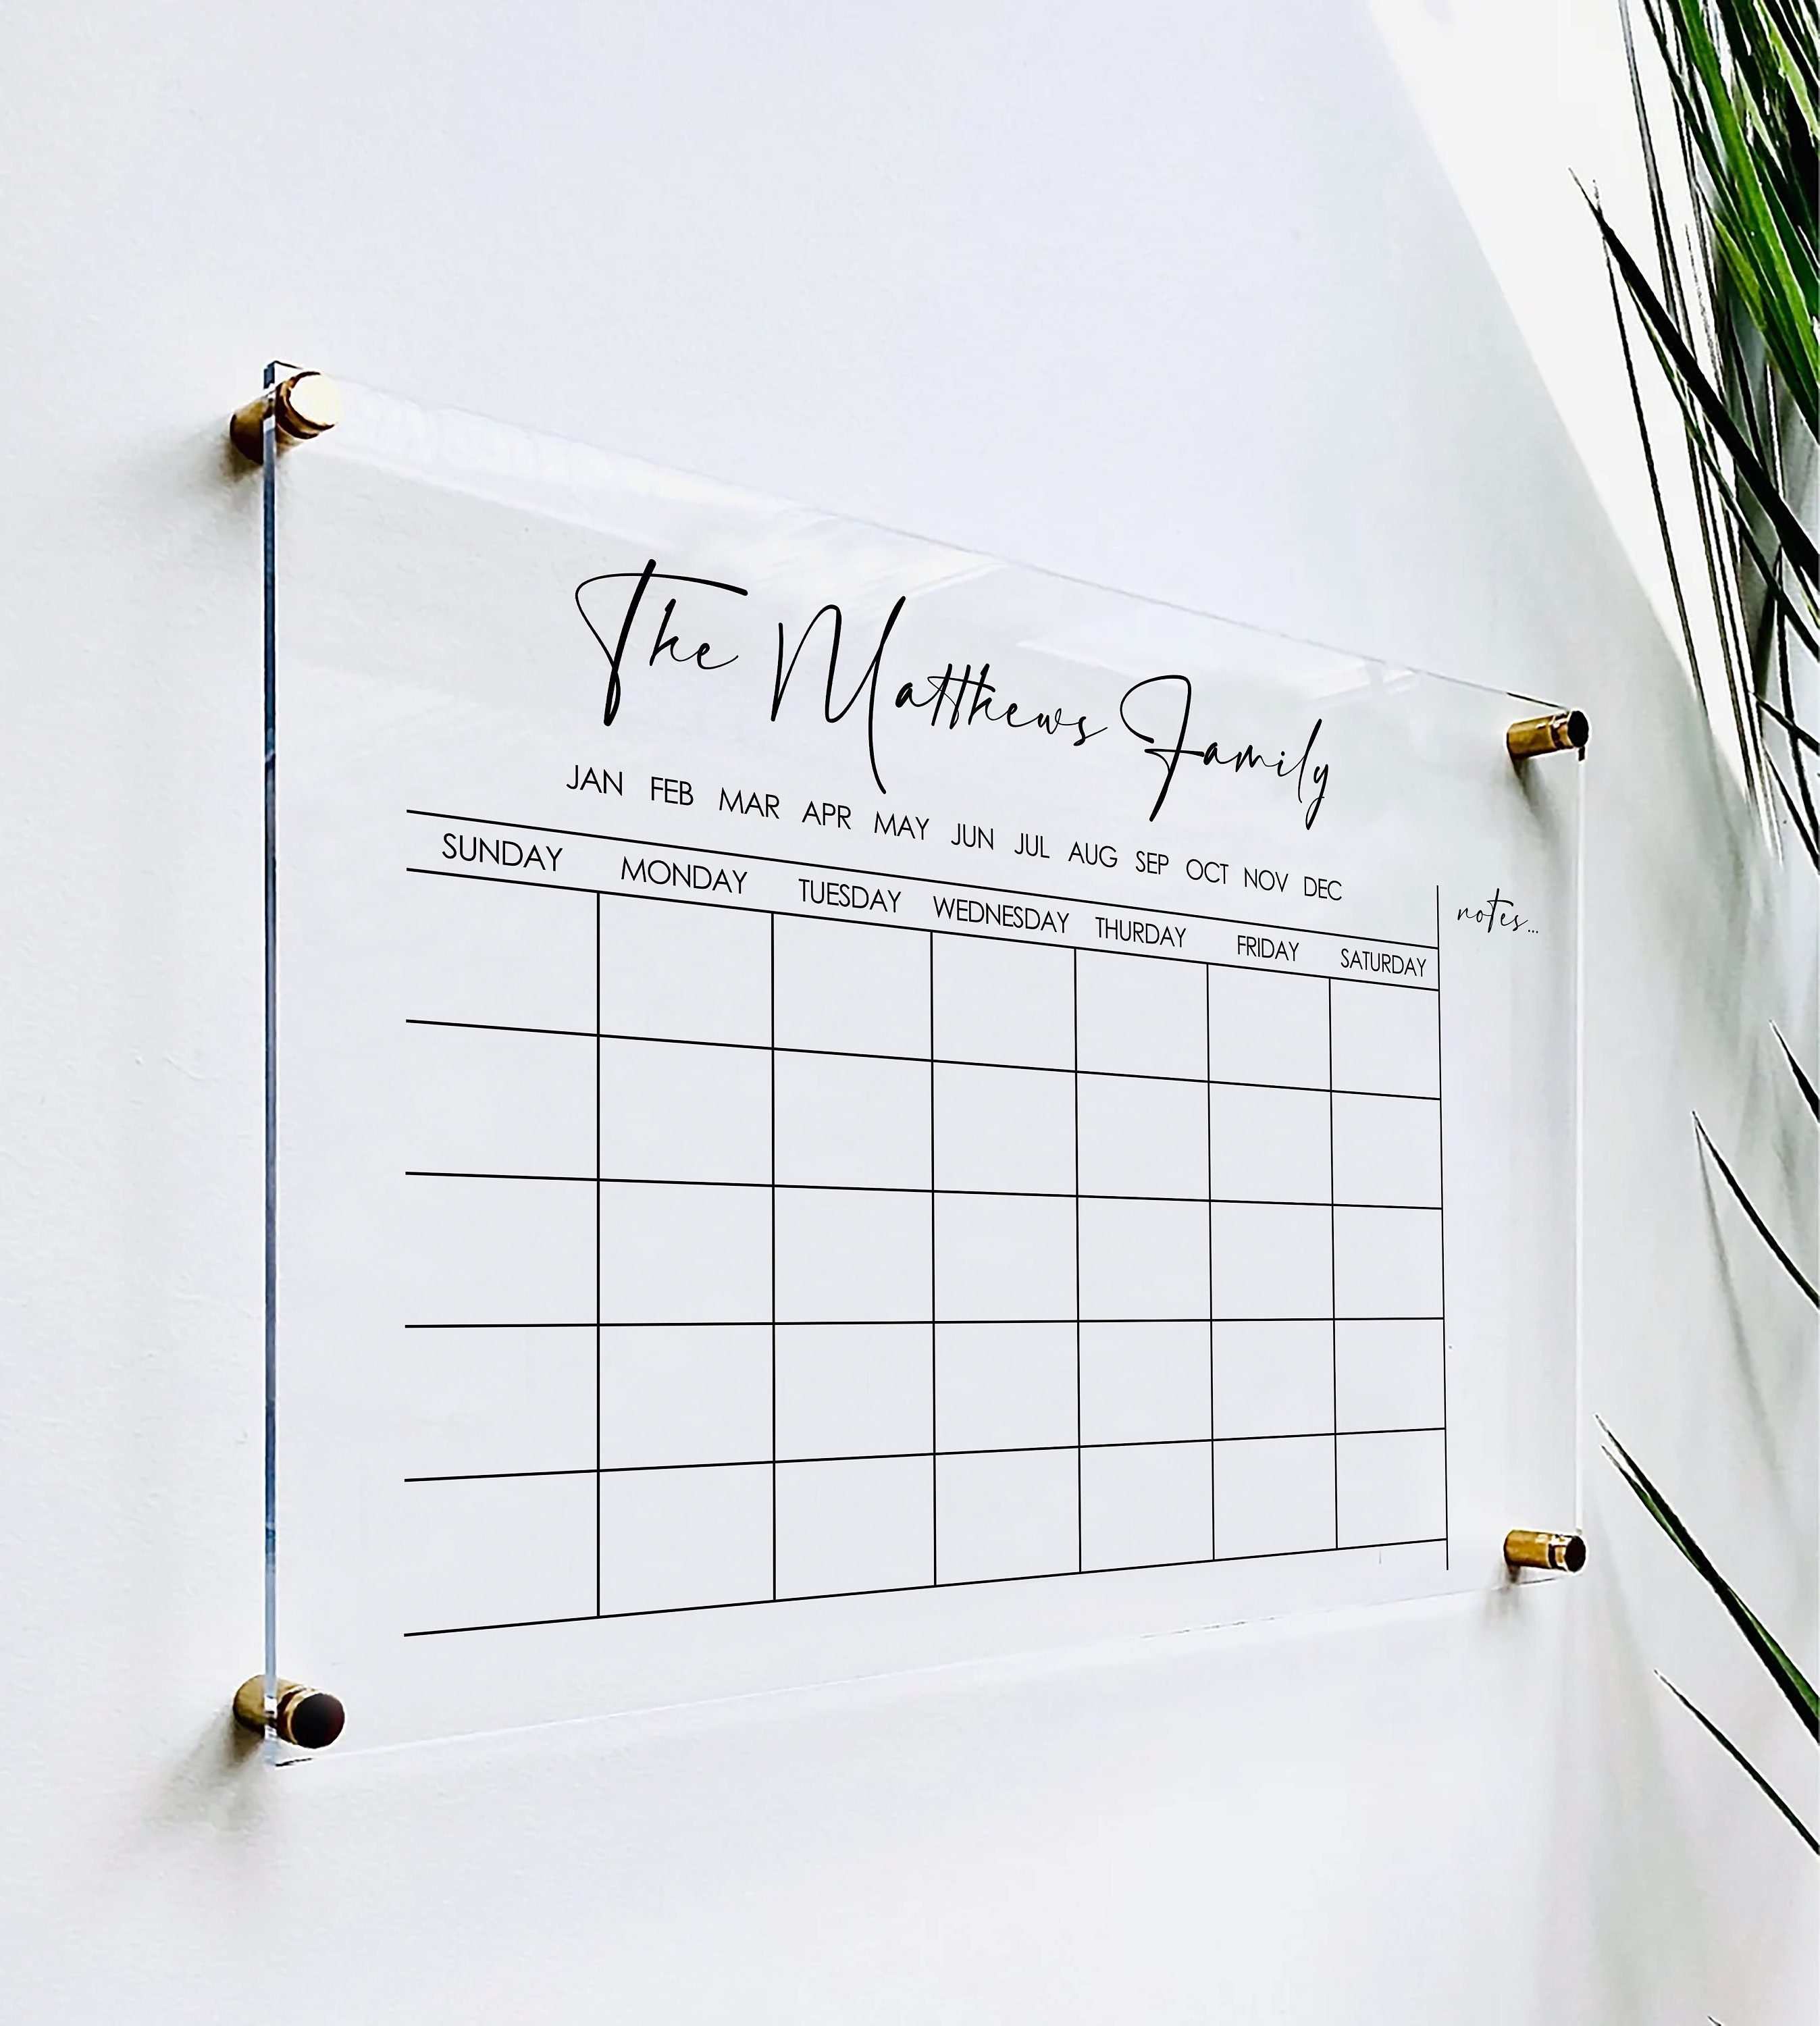 Monthly And Weekly Wall Calendar, Family Calendar Dry Erase Board, Calendar  Planner, Monthly Planner, Family Wall Planner, Acrylic Board - Tetris boards